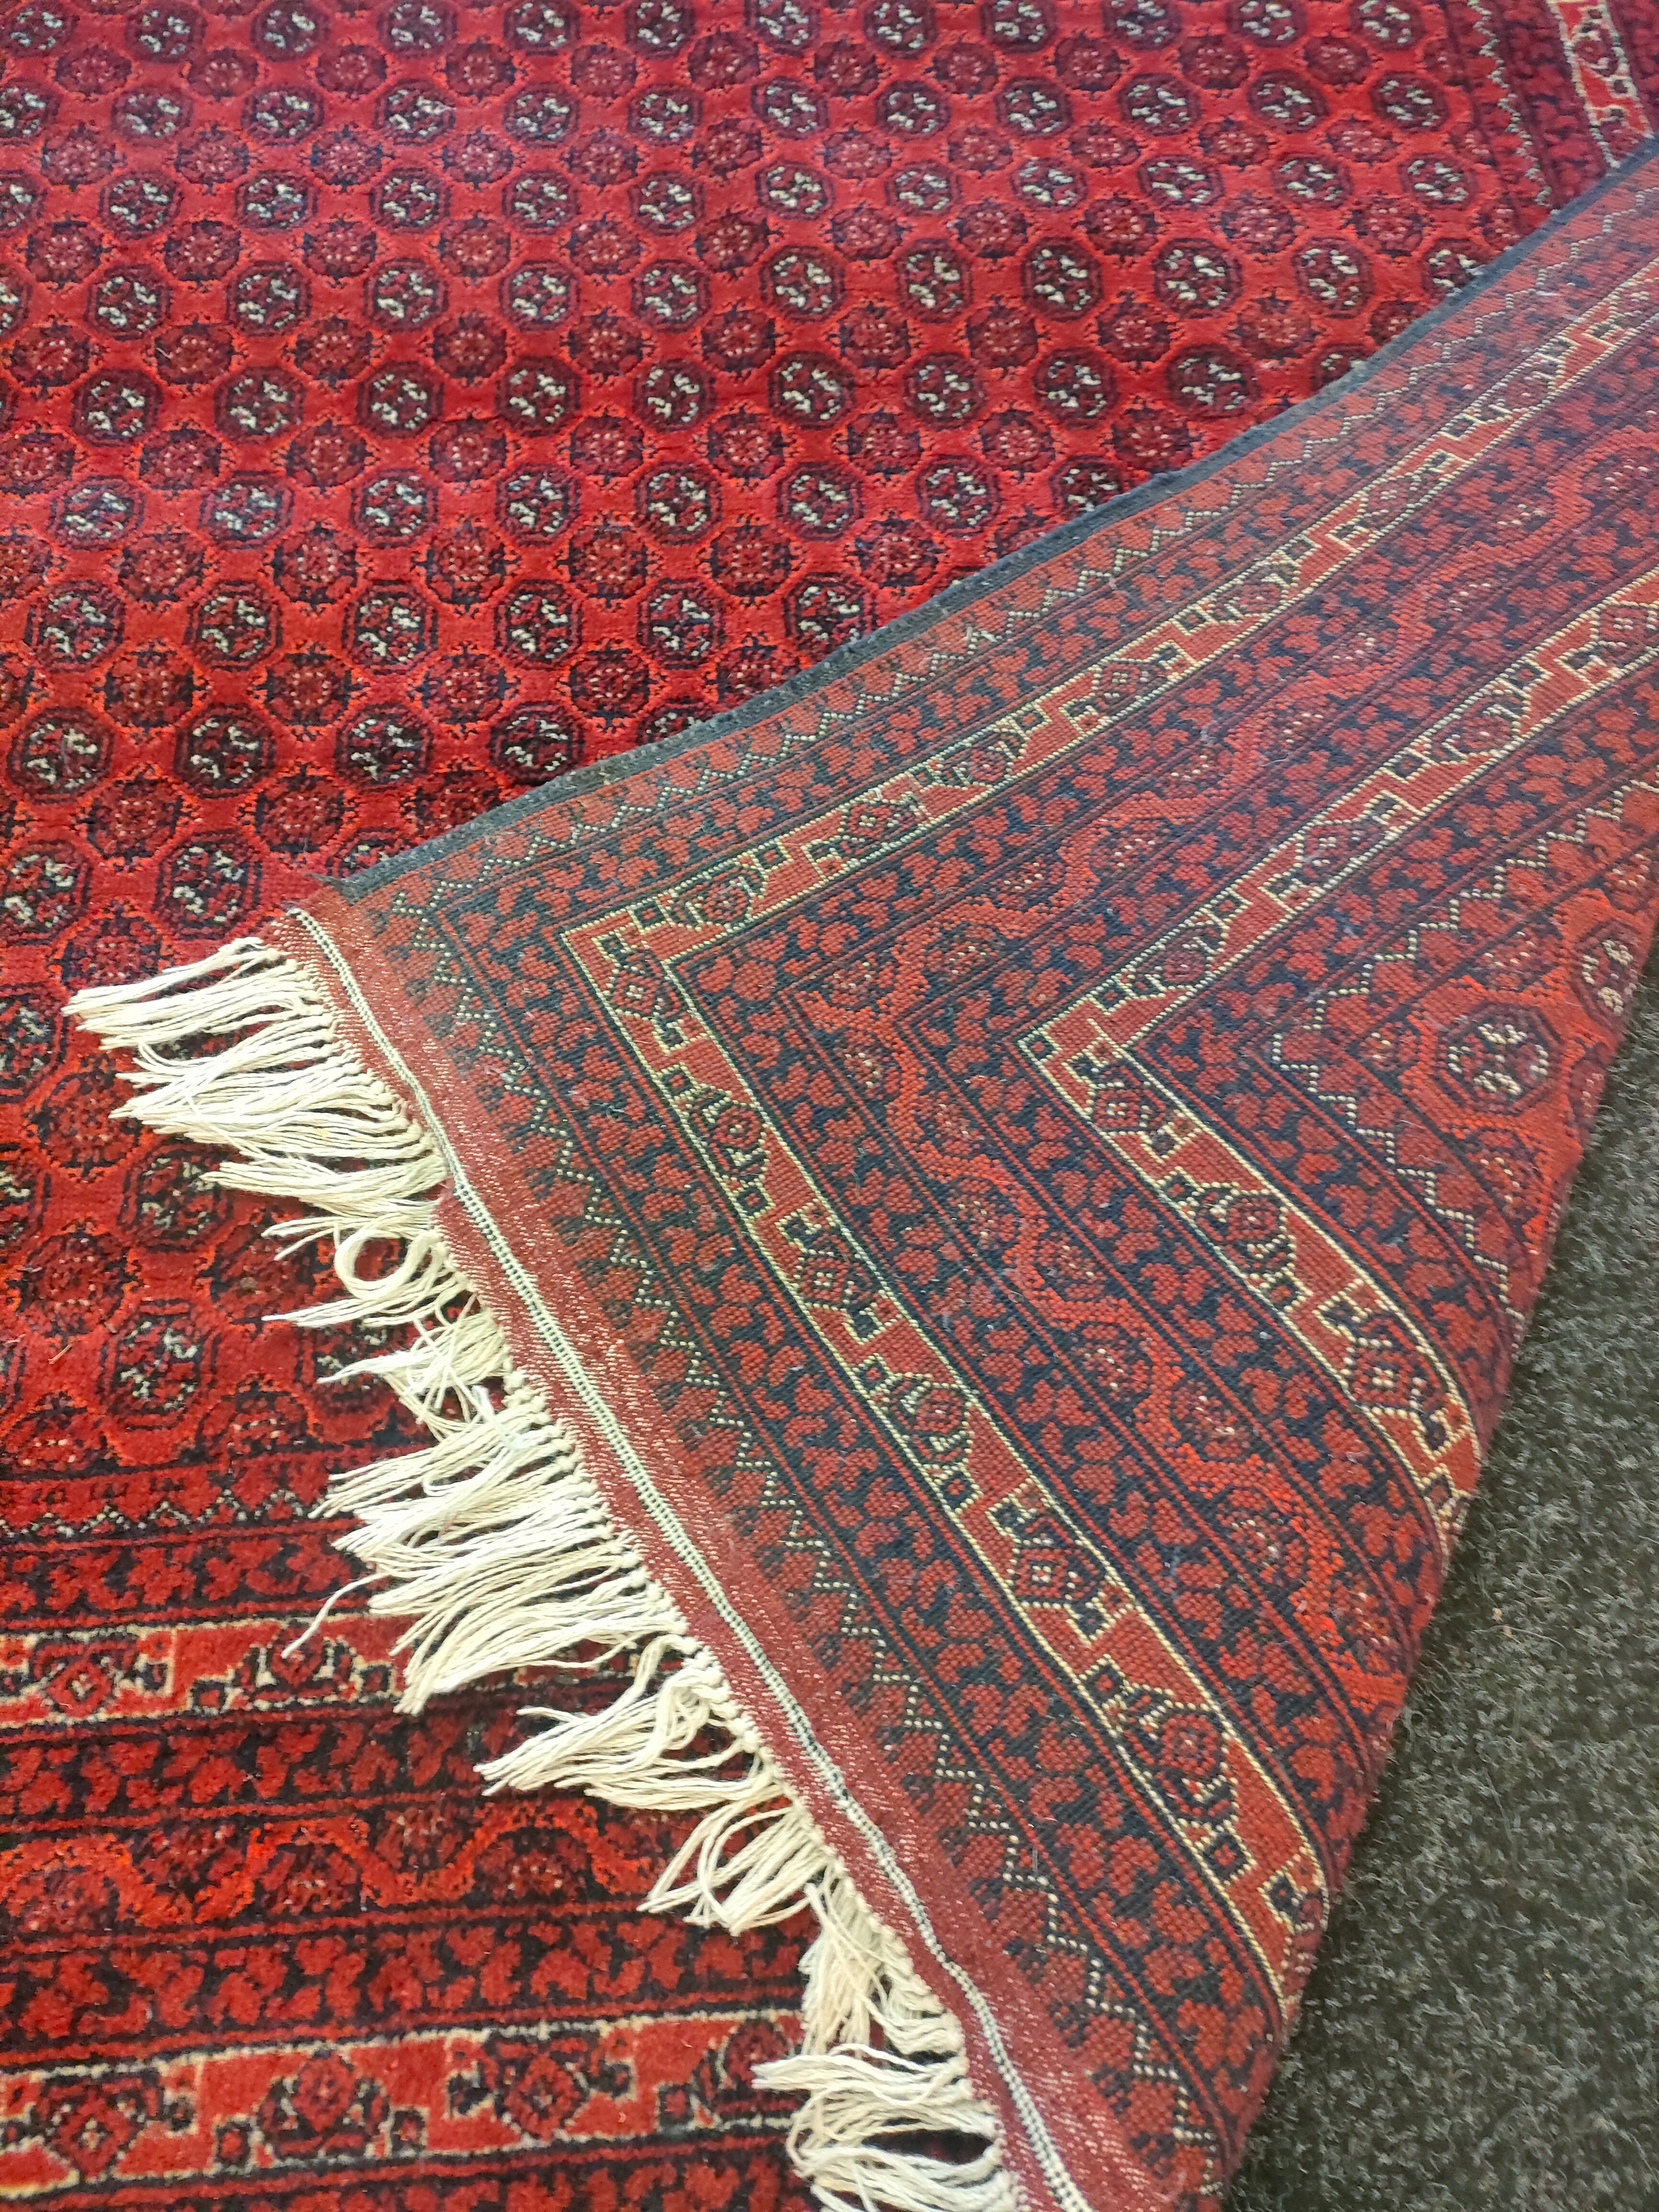 A Large Afghan hand woven red rug with shite trimming [201x154cm] - Image 4 of 4